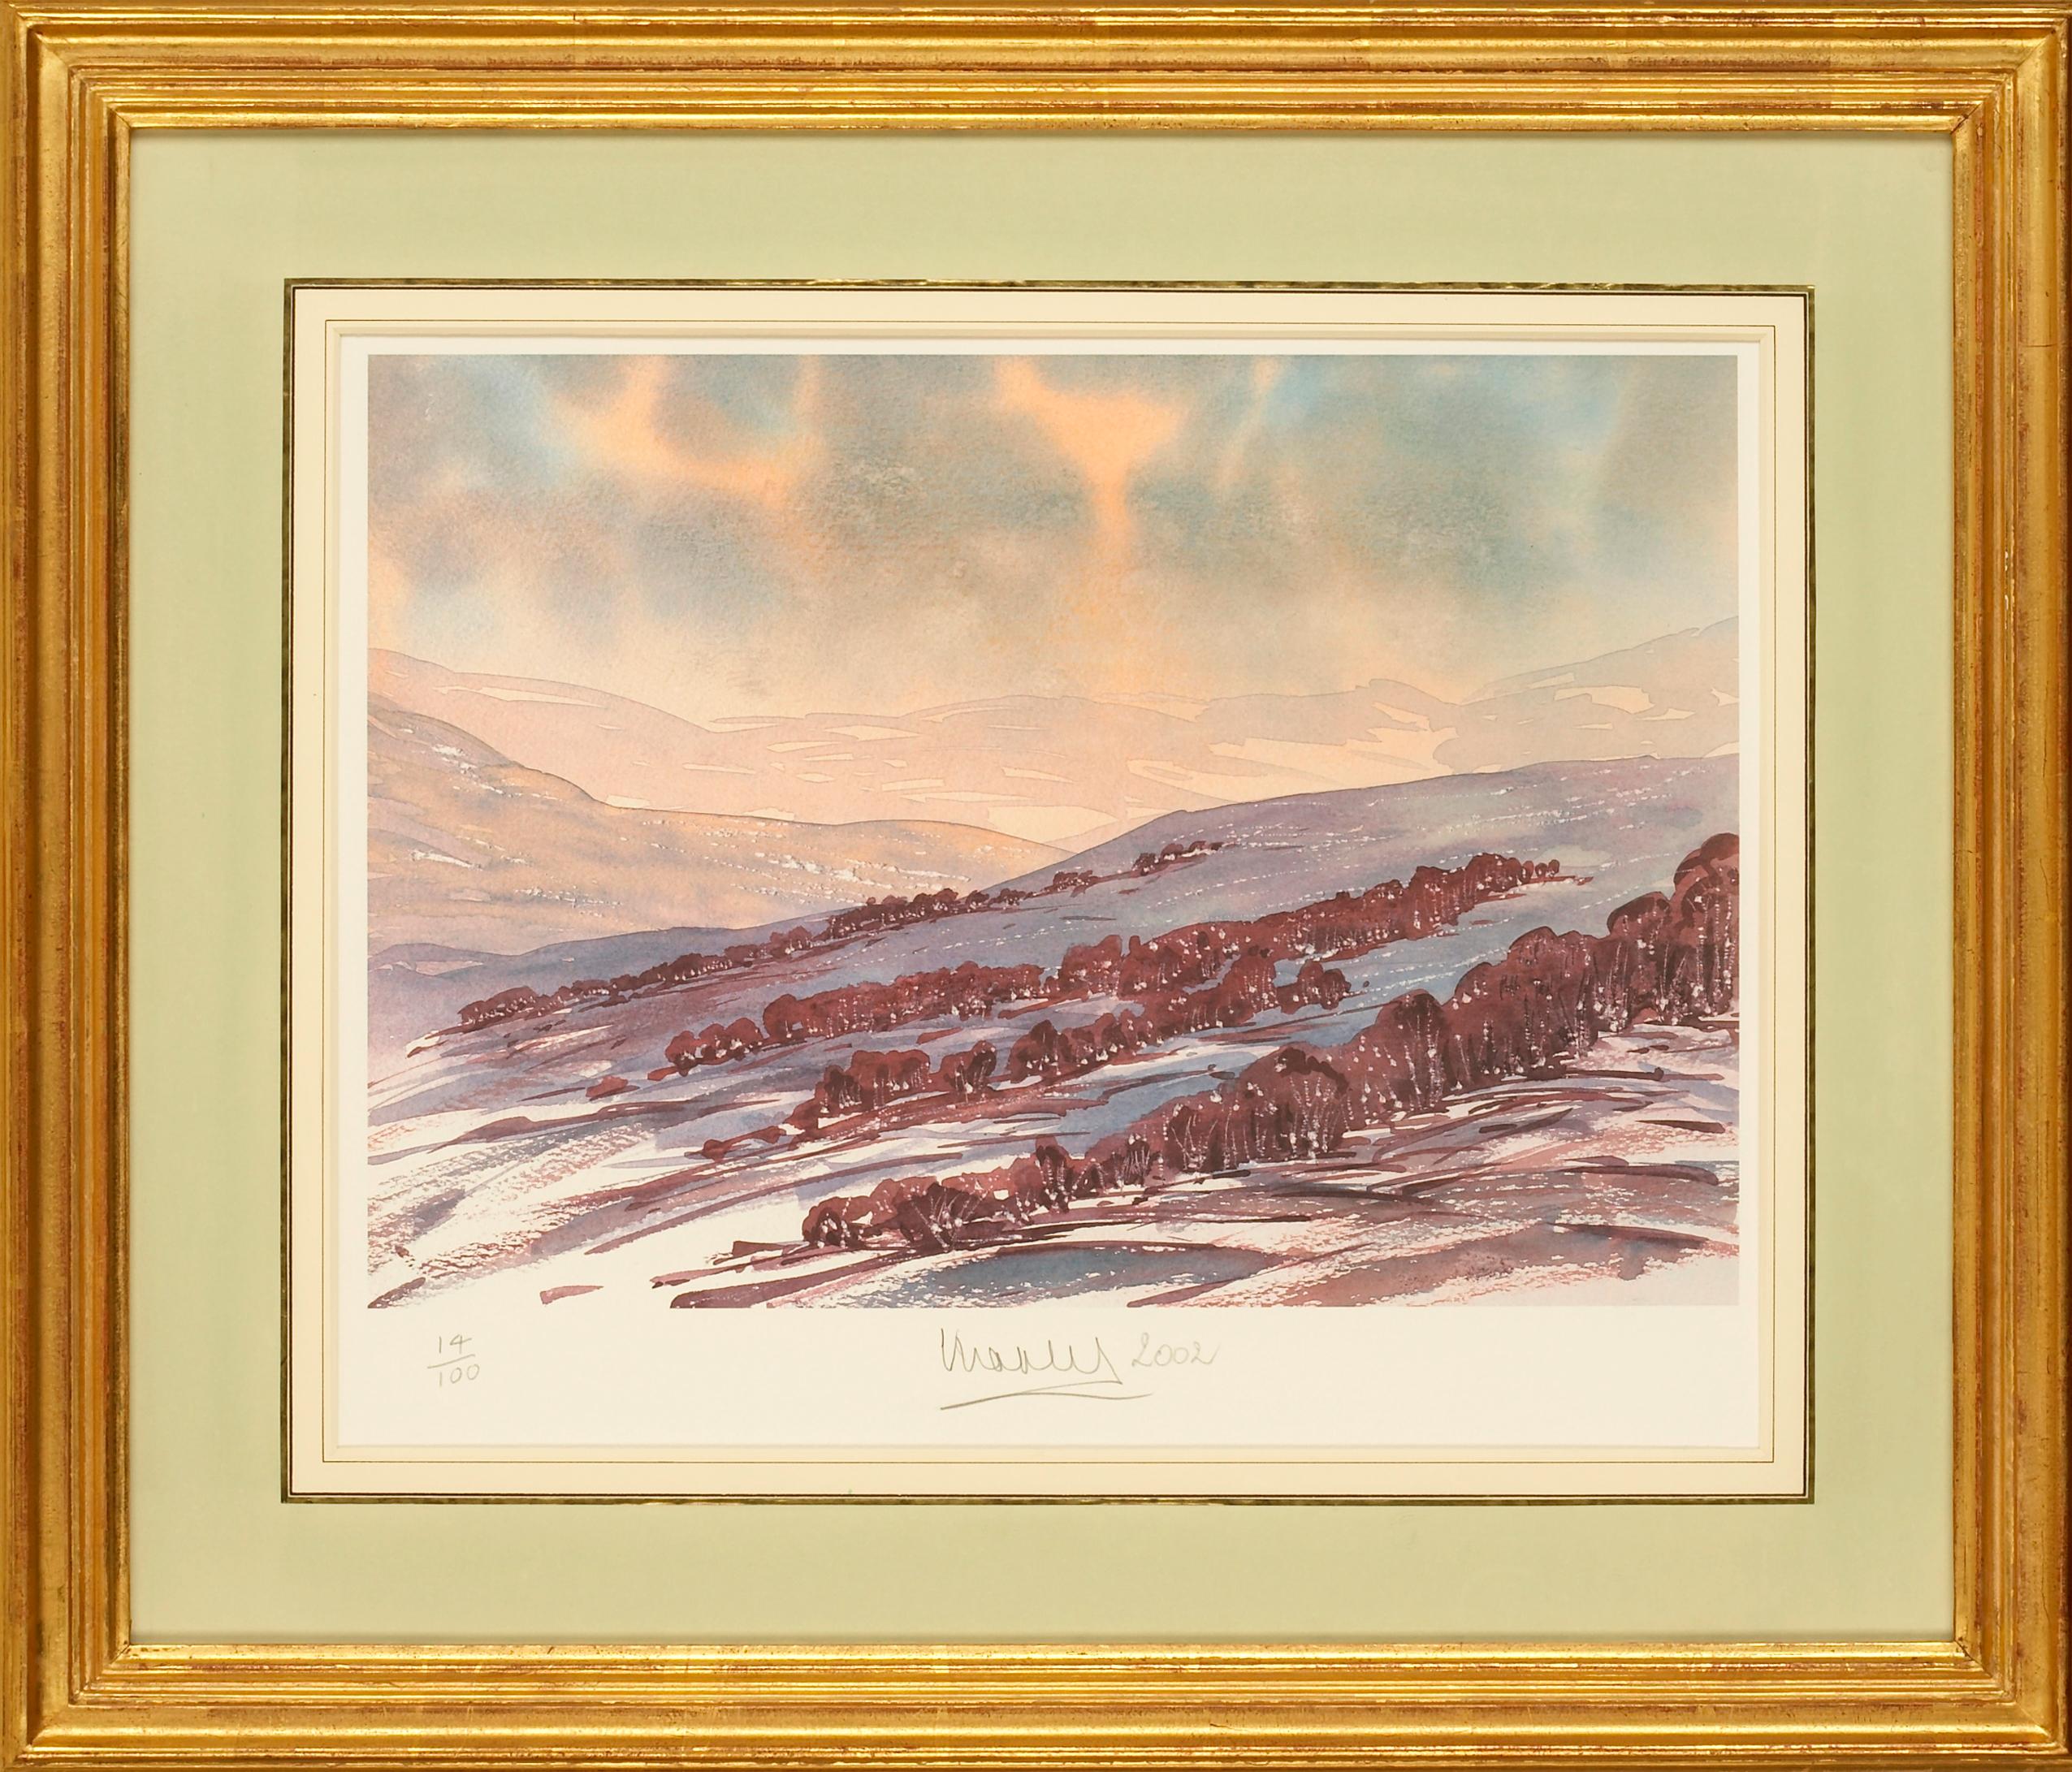 Glengairn, Aberdeenshire - Signed Lithograph, Royal Art, Scotland, British - Print by His Majesty King Charles III